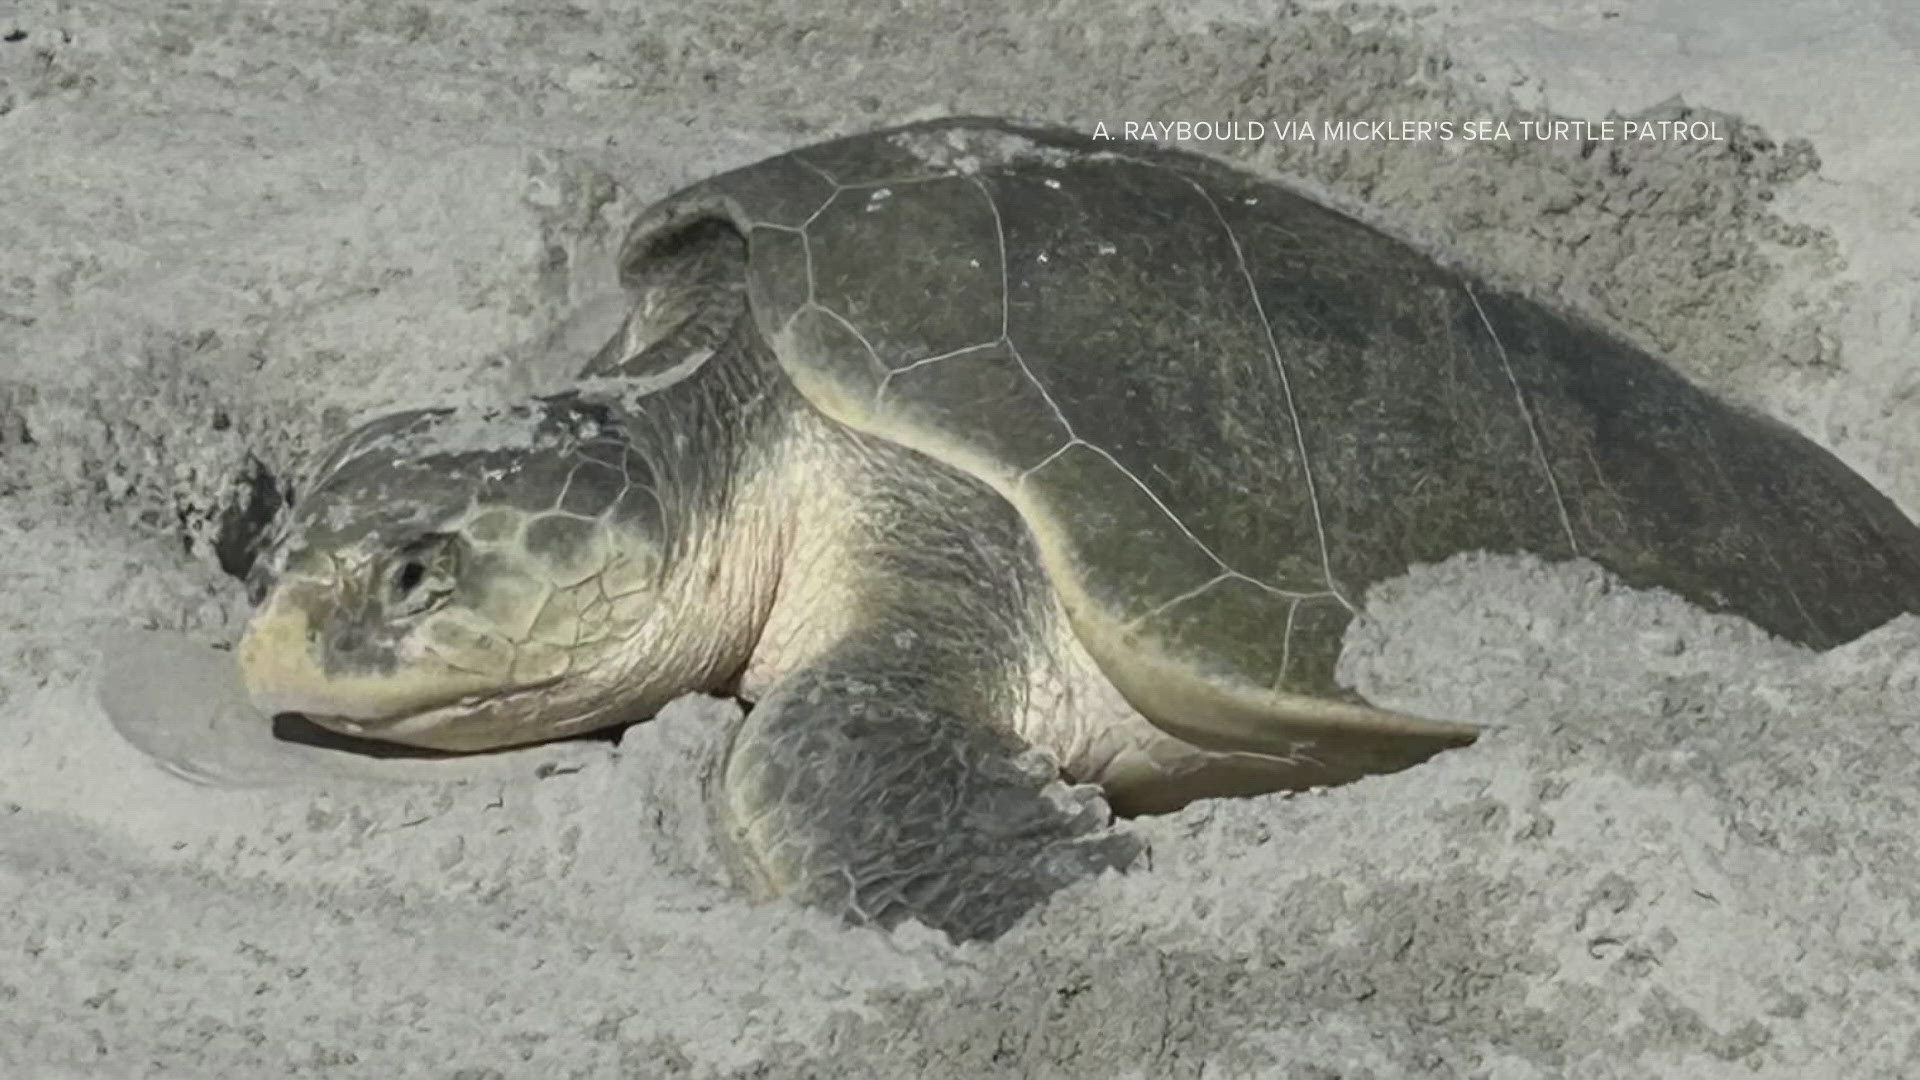 The species is the smallest and most endangered sea turtle, according to the National Wildlife Federation.